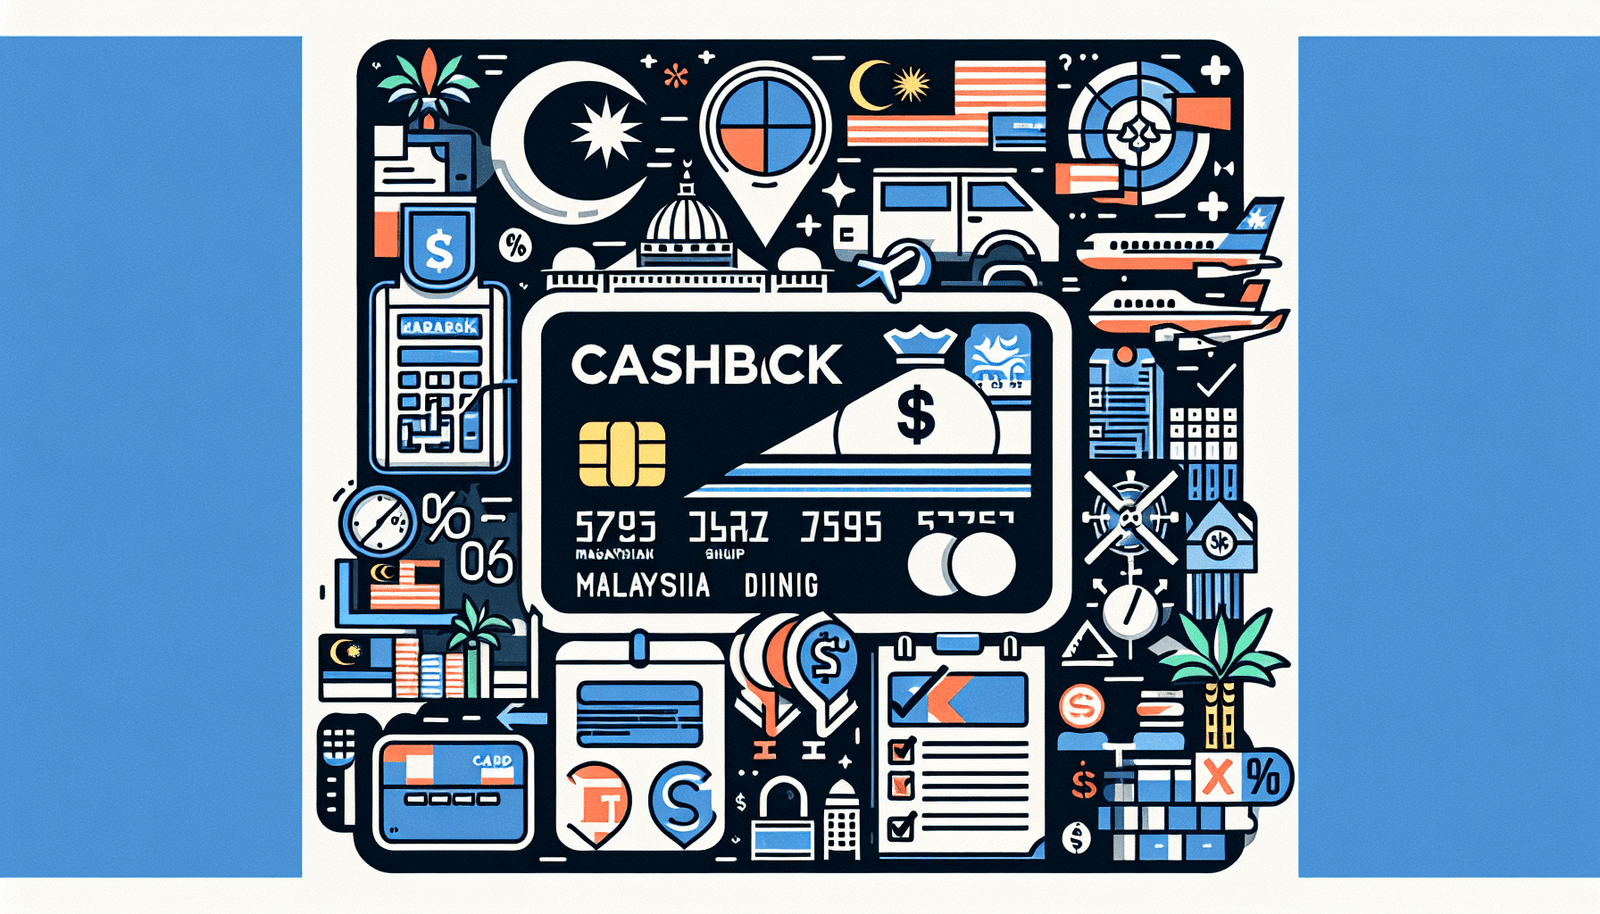 How To Choose The Best Cashback Credit Card In Malaysia